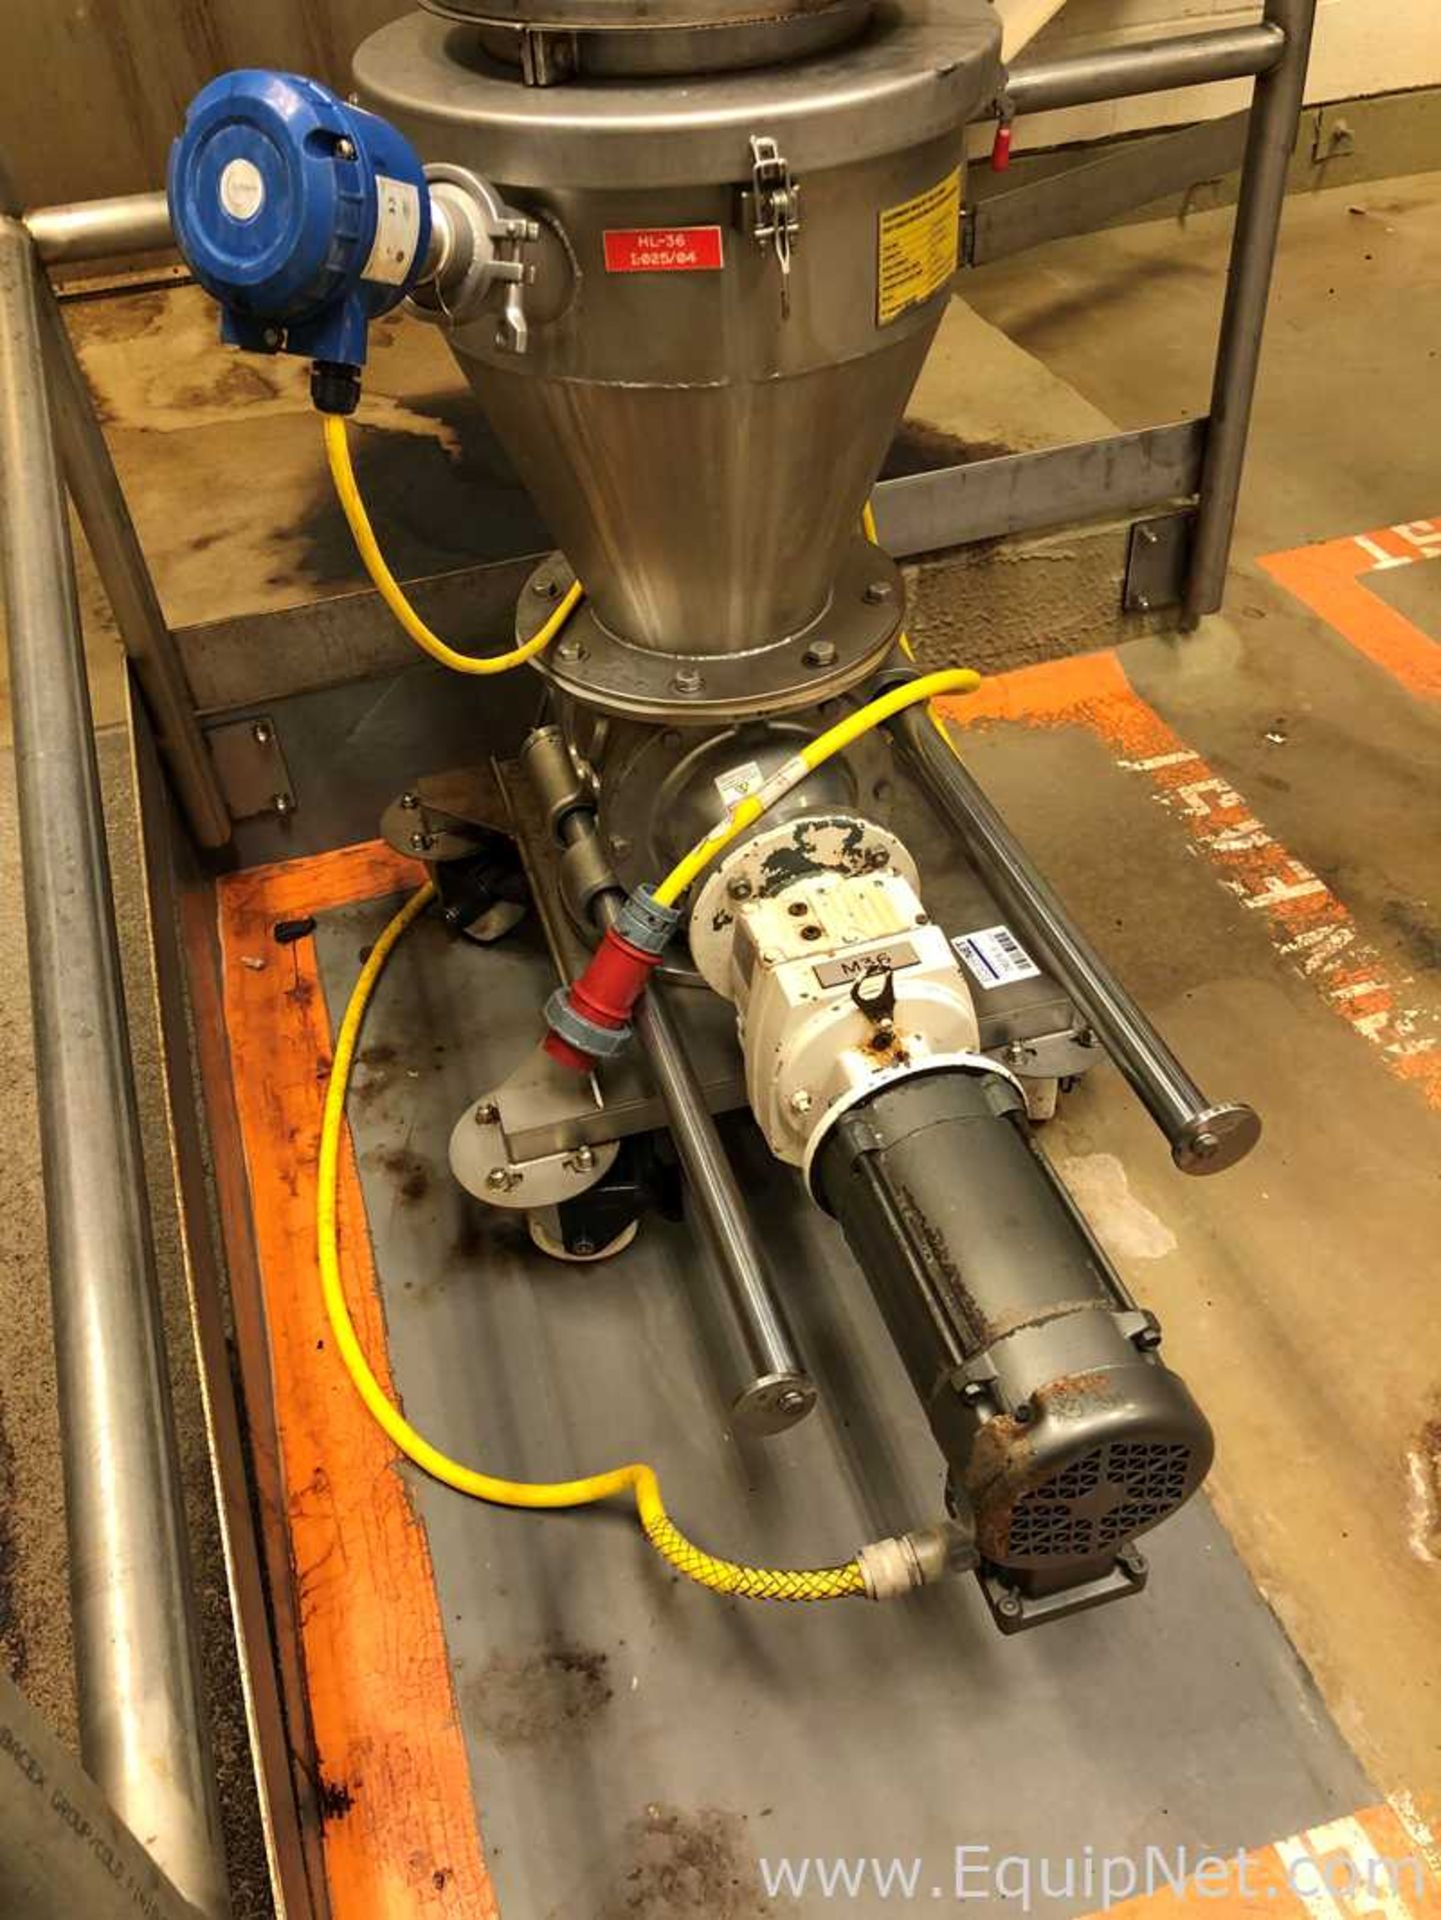 One Vacuum Conveyor System Vac-U-Max With Hopper And One Rotary Valve - Image 3 of 10